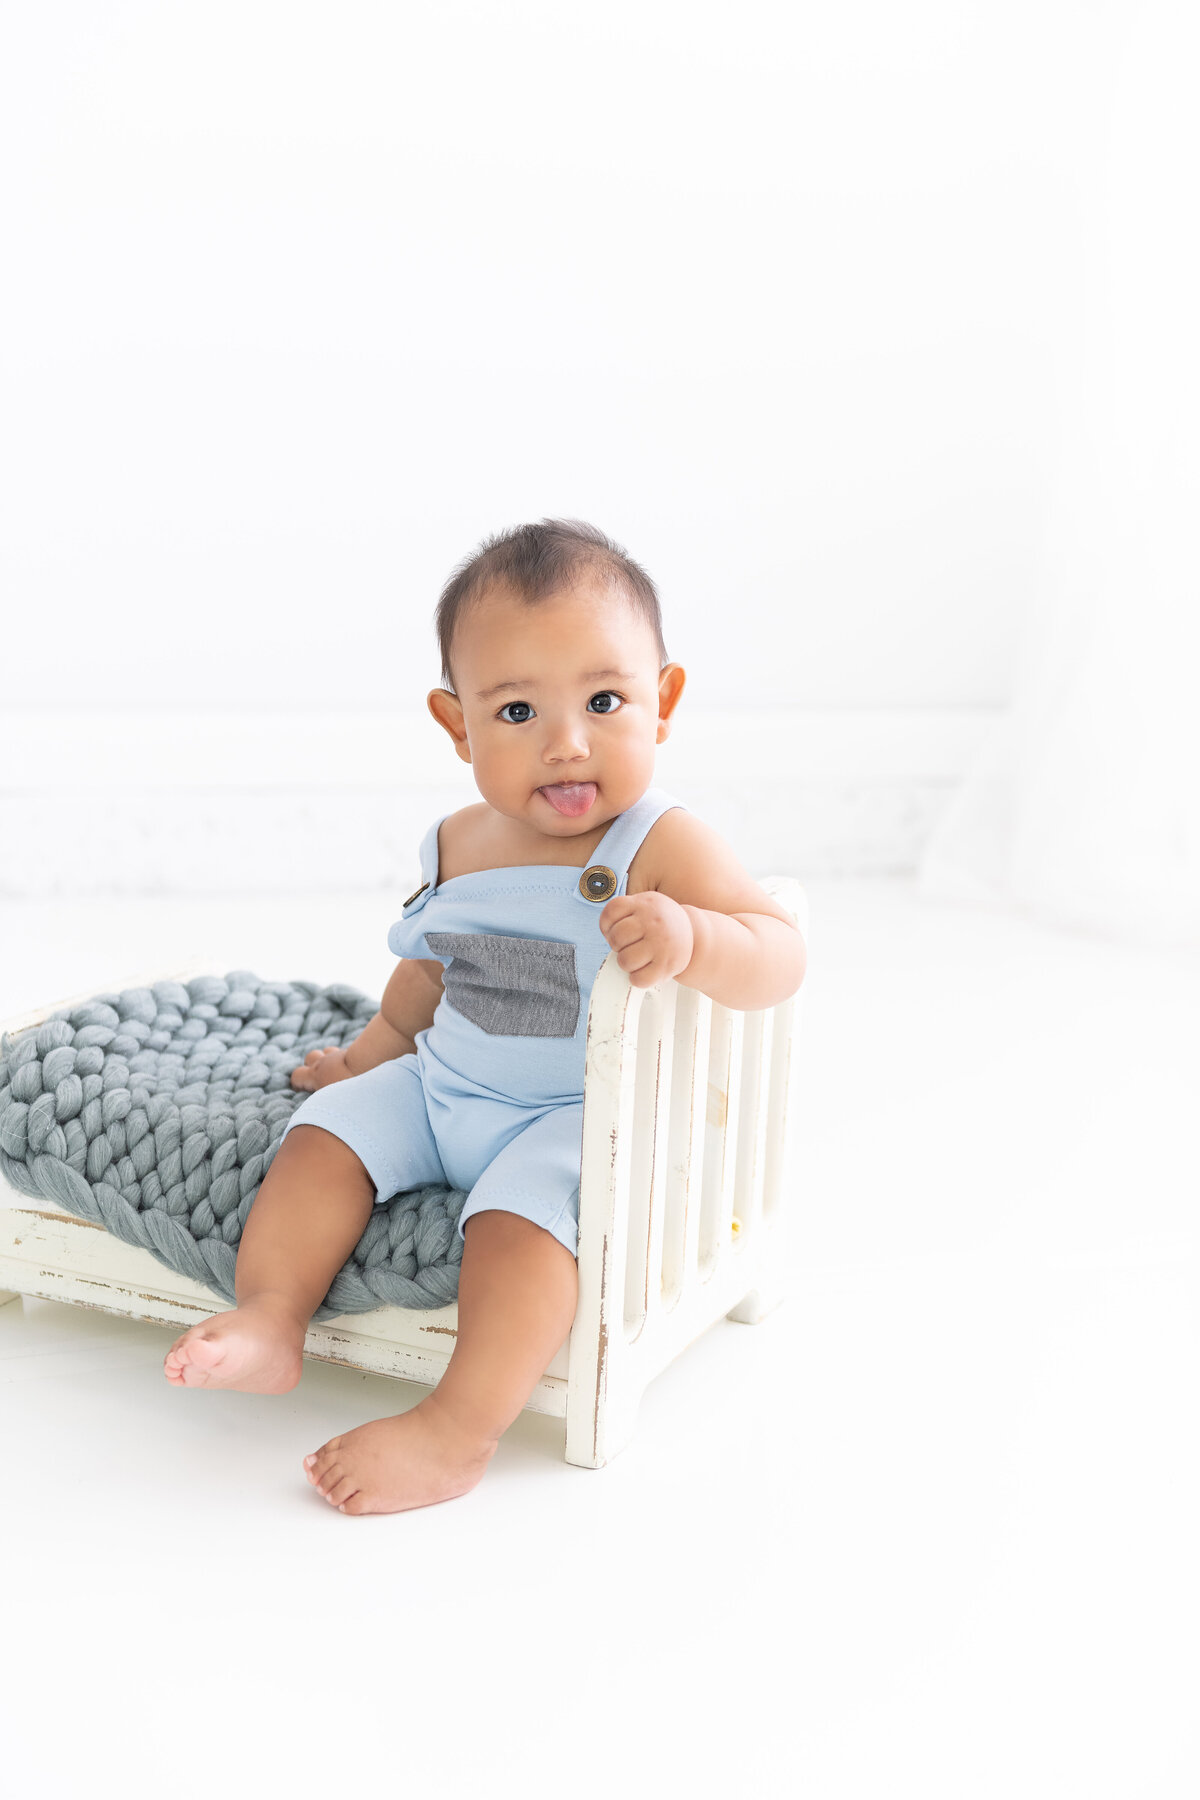 A young toddler boy in blue overalls sits on a small wooden bed with tongue out